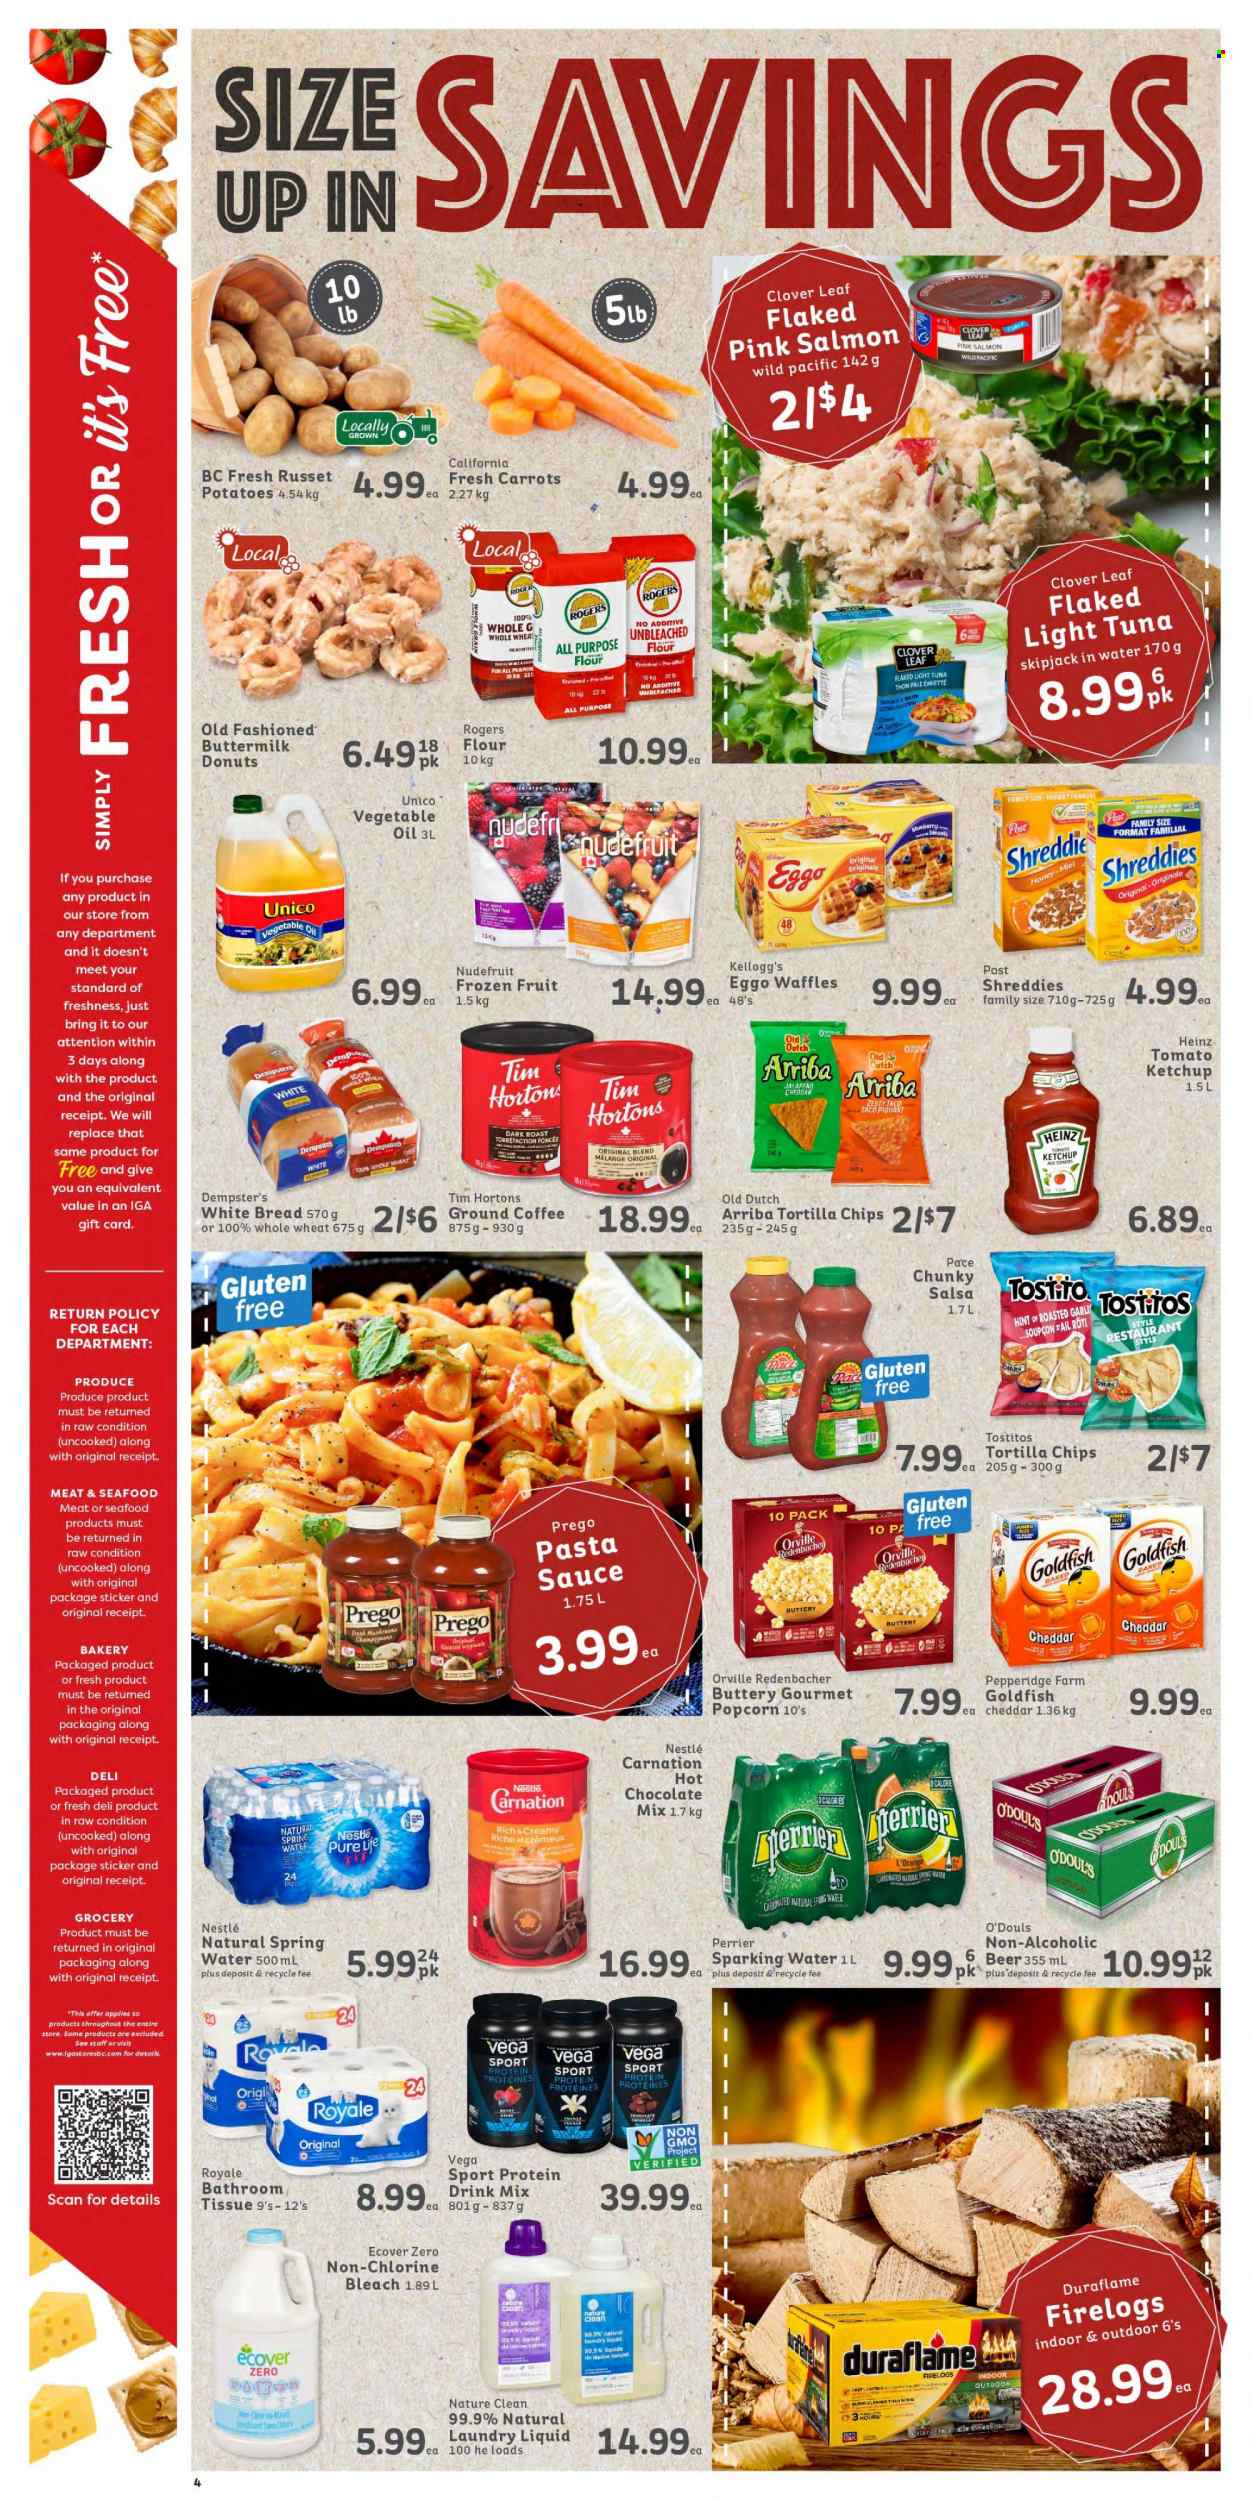 thumbnail - IGA Simple Goodness Flyer - November 26, 2021 - December 02, 2021 - Sales products - bread, white bread, donut, waffles, carrots, russet potatoes, potatoes, jalapeño, tuna, seafood, pasta sauce, sauce, cheese, Clover, buttermilk, protein drink, Kellogg's, tortilla chips, popcorn, Goldfish, Tostitos, all purpose flour, Heinz, light tuna, salsa, vegetable oil, oil, honey, Perrier, spring water, hot chocolate, coffee, ground coffee, beer, Nestlé, ketchup, oranges. Page 4.